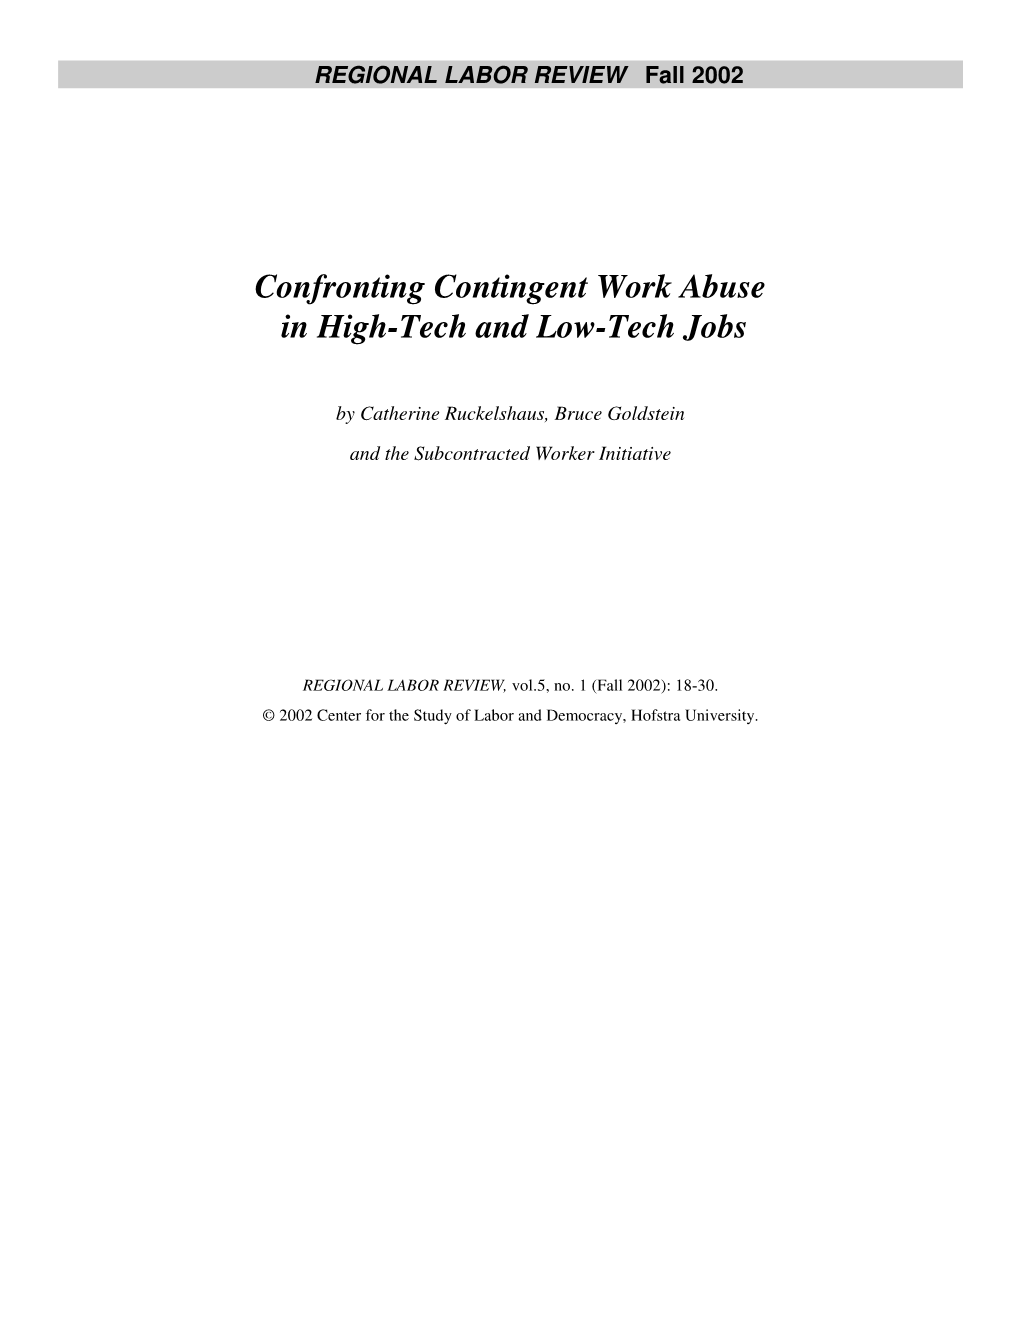 Confronting Contingent Work Abuse in High-Tech and Low-Tech Jobs